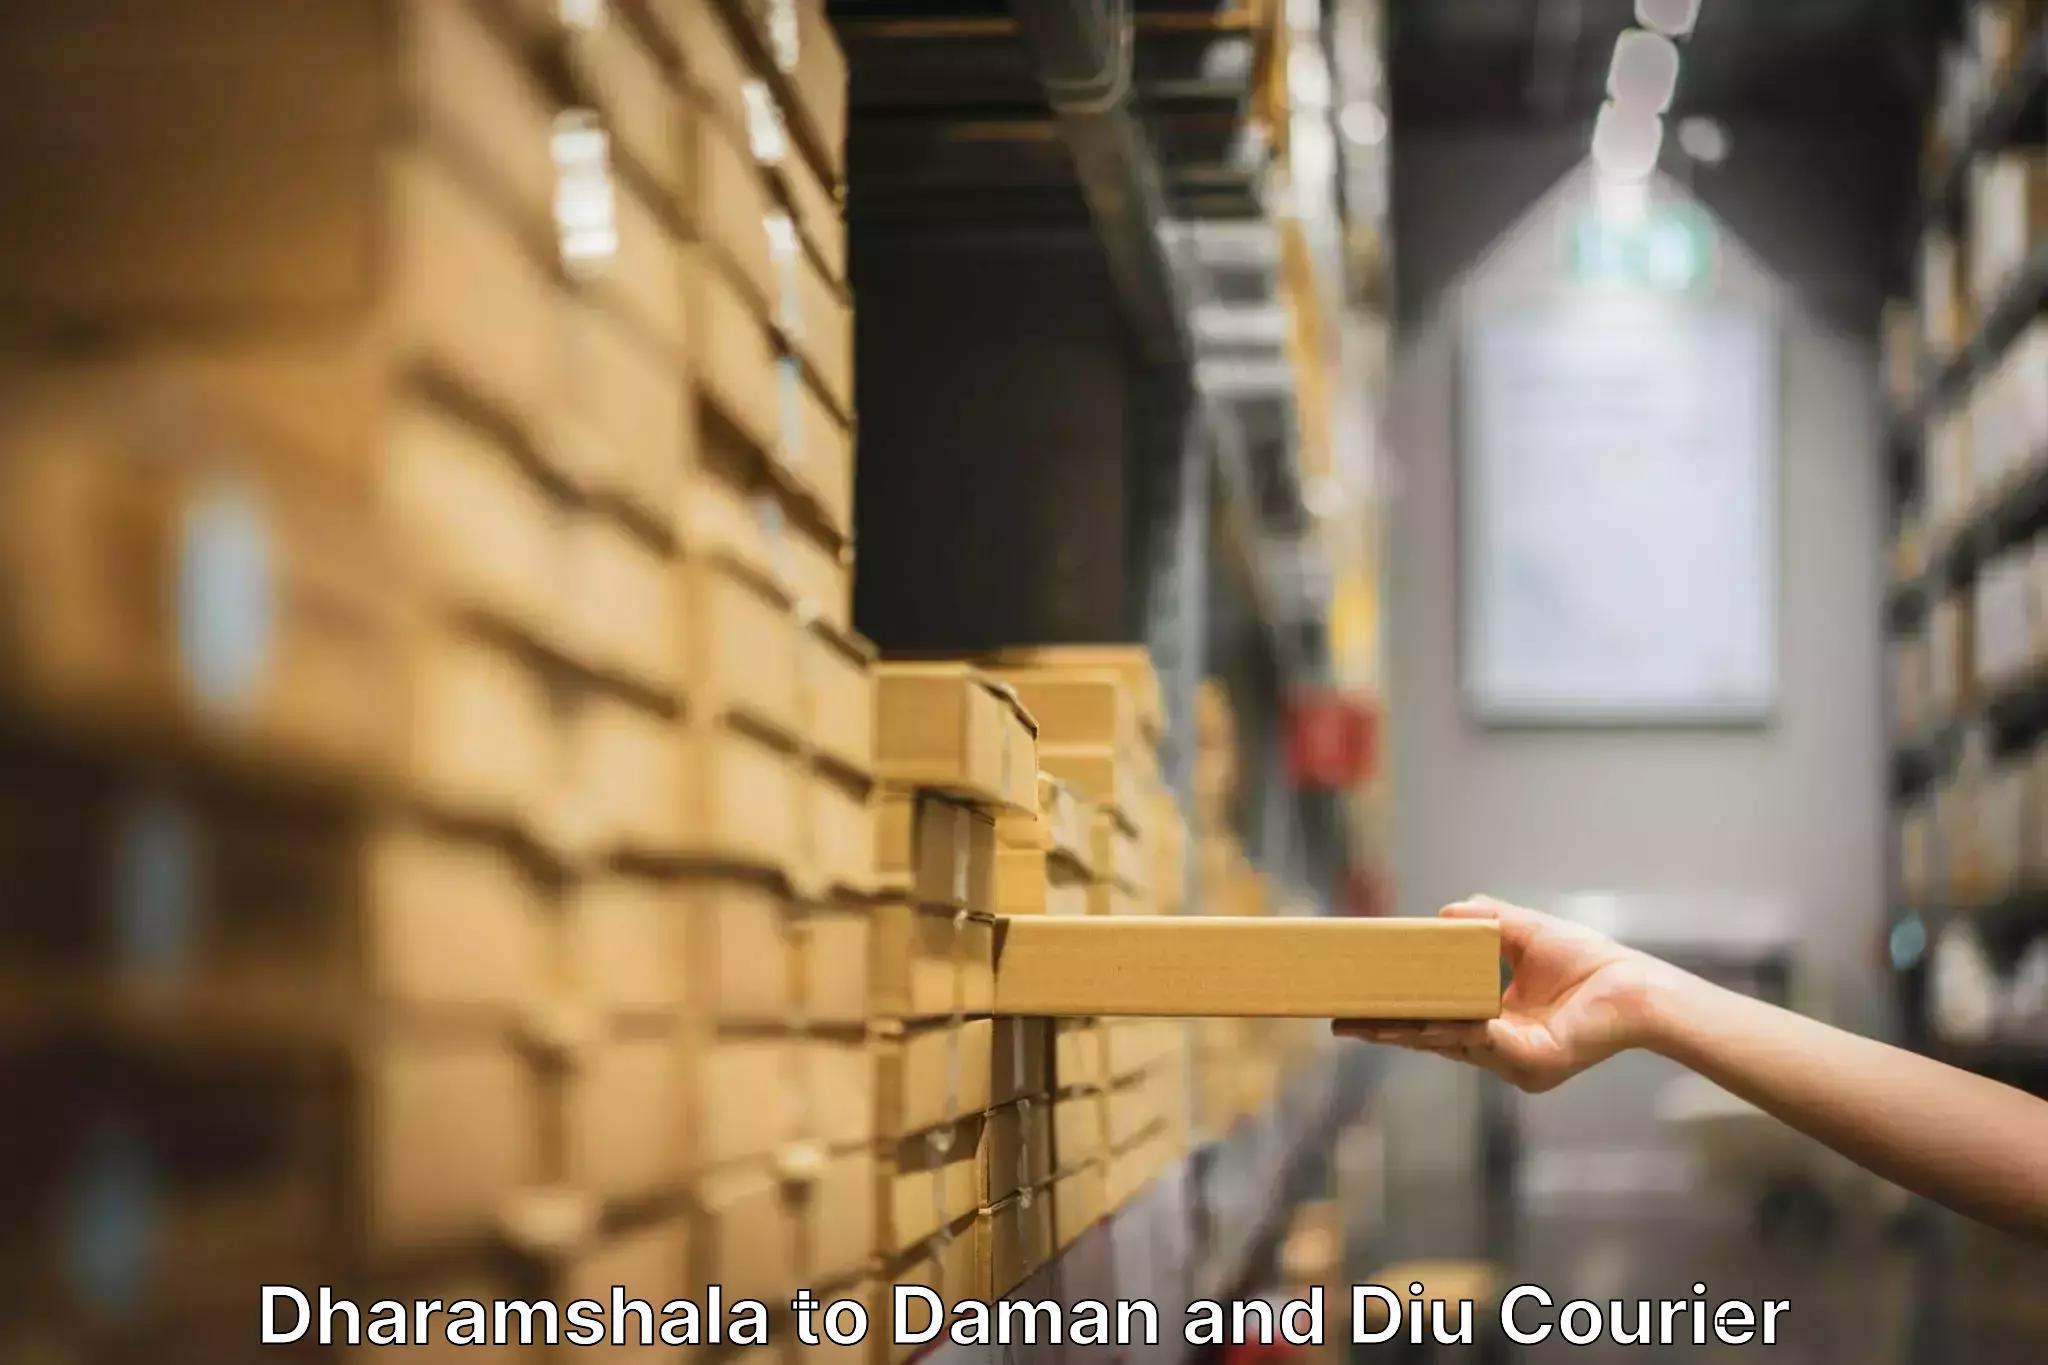 Furniture delivery service Dharamshala to Daman